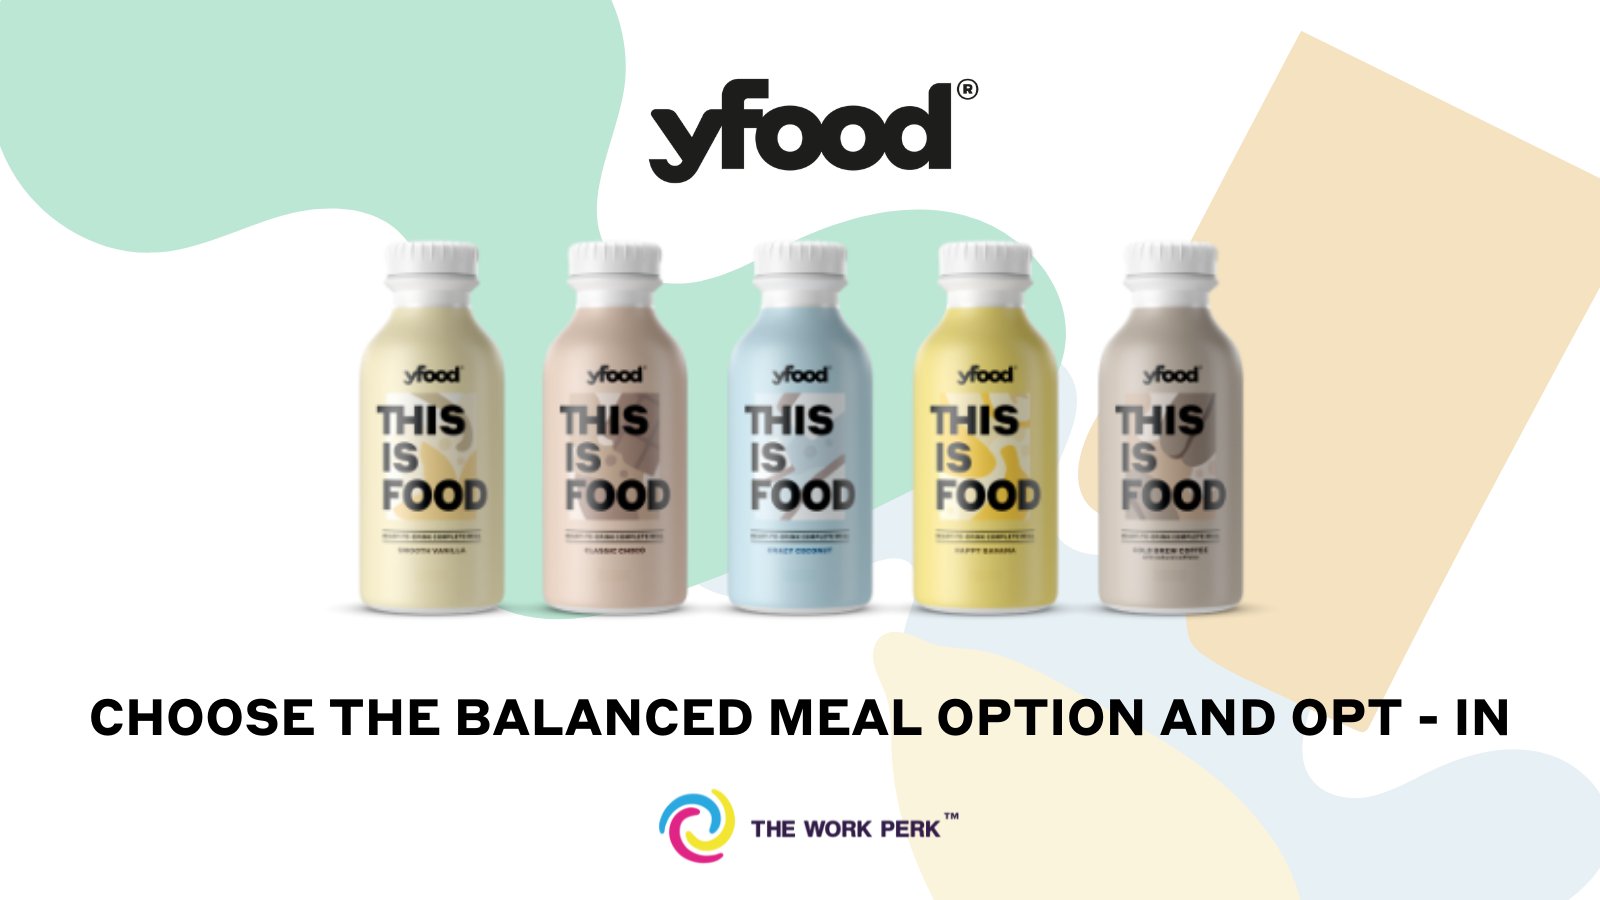 Theworkperk on X: Looking for something balanced and tasty? yfood drinks  supply your body with essential nutrients such as proteins, fibre,  plant-based oils and 26 vitamins and minerals! Opt-in today to receive